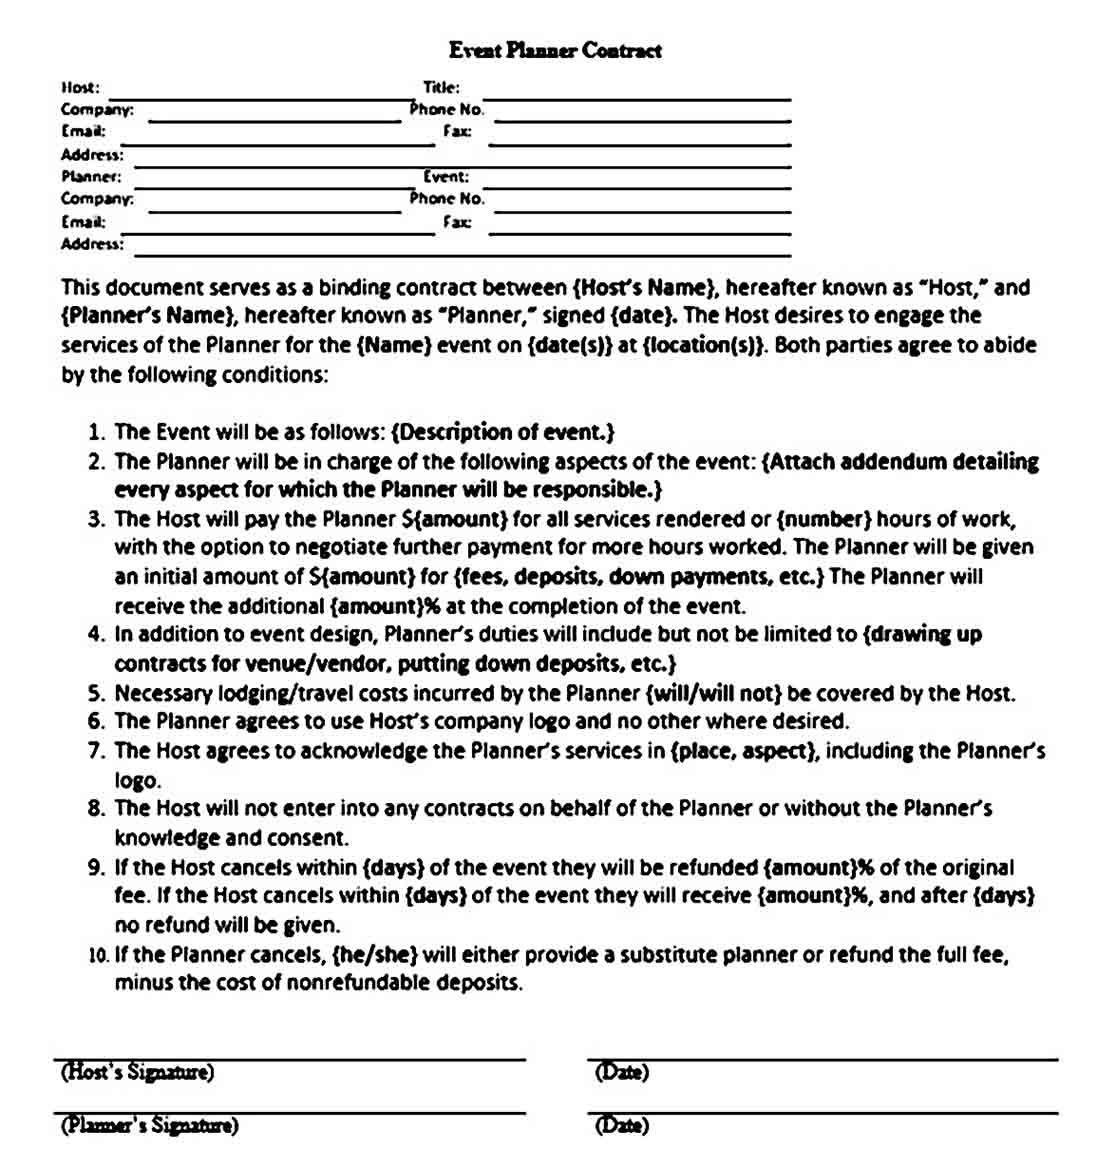 Basic Event Planner Contract Sample